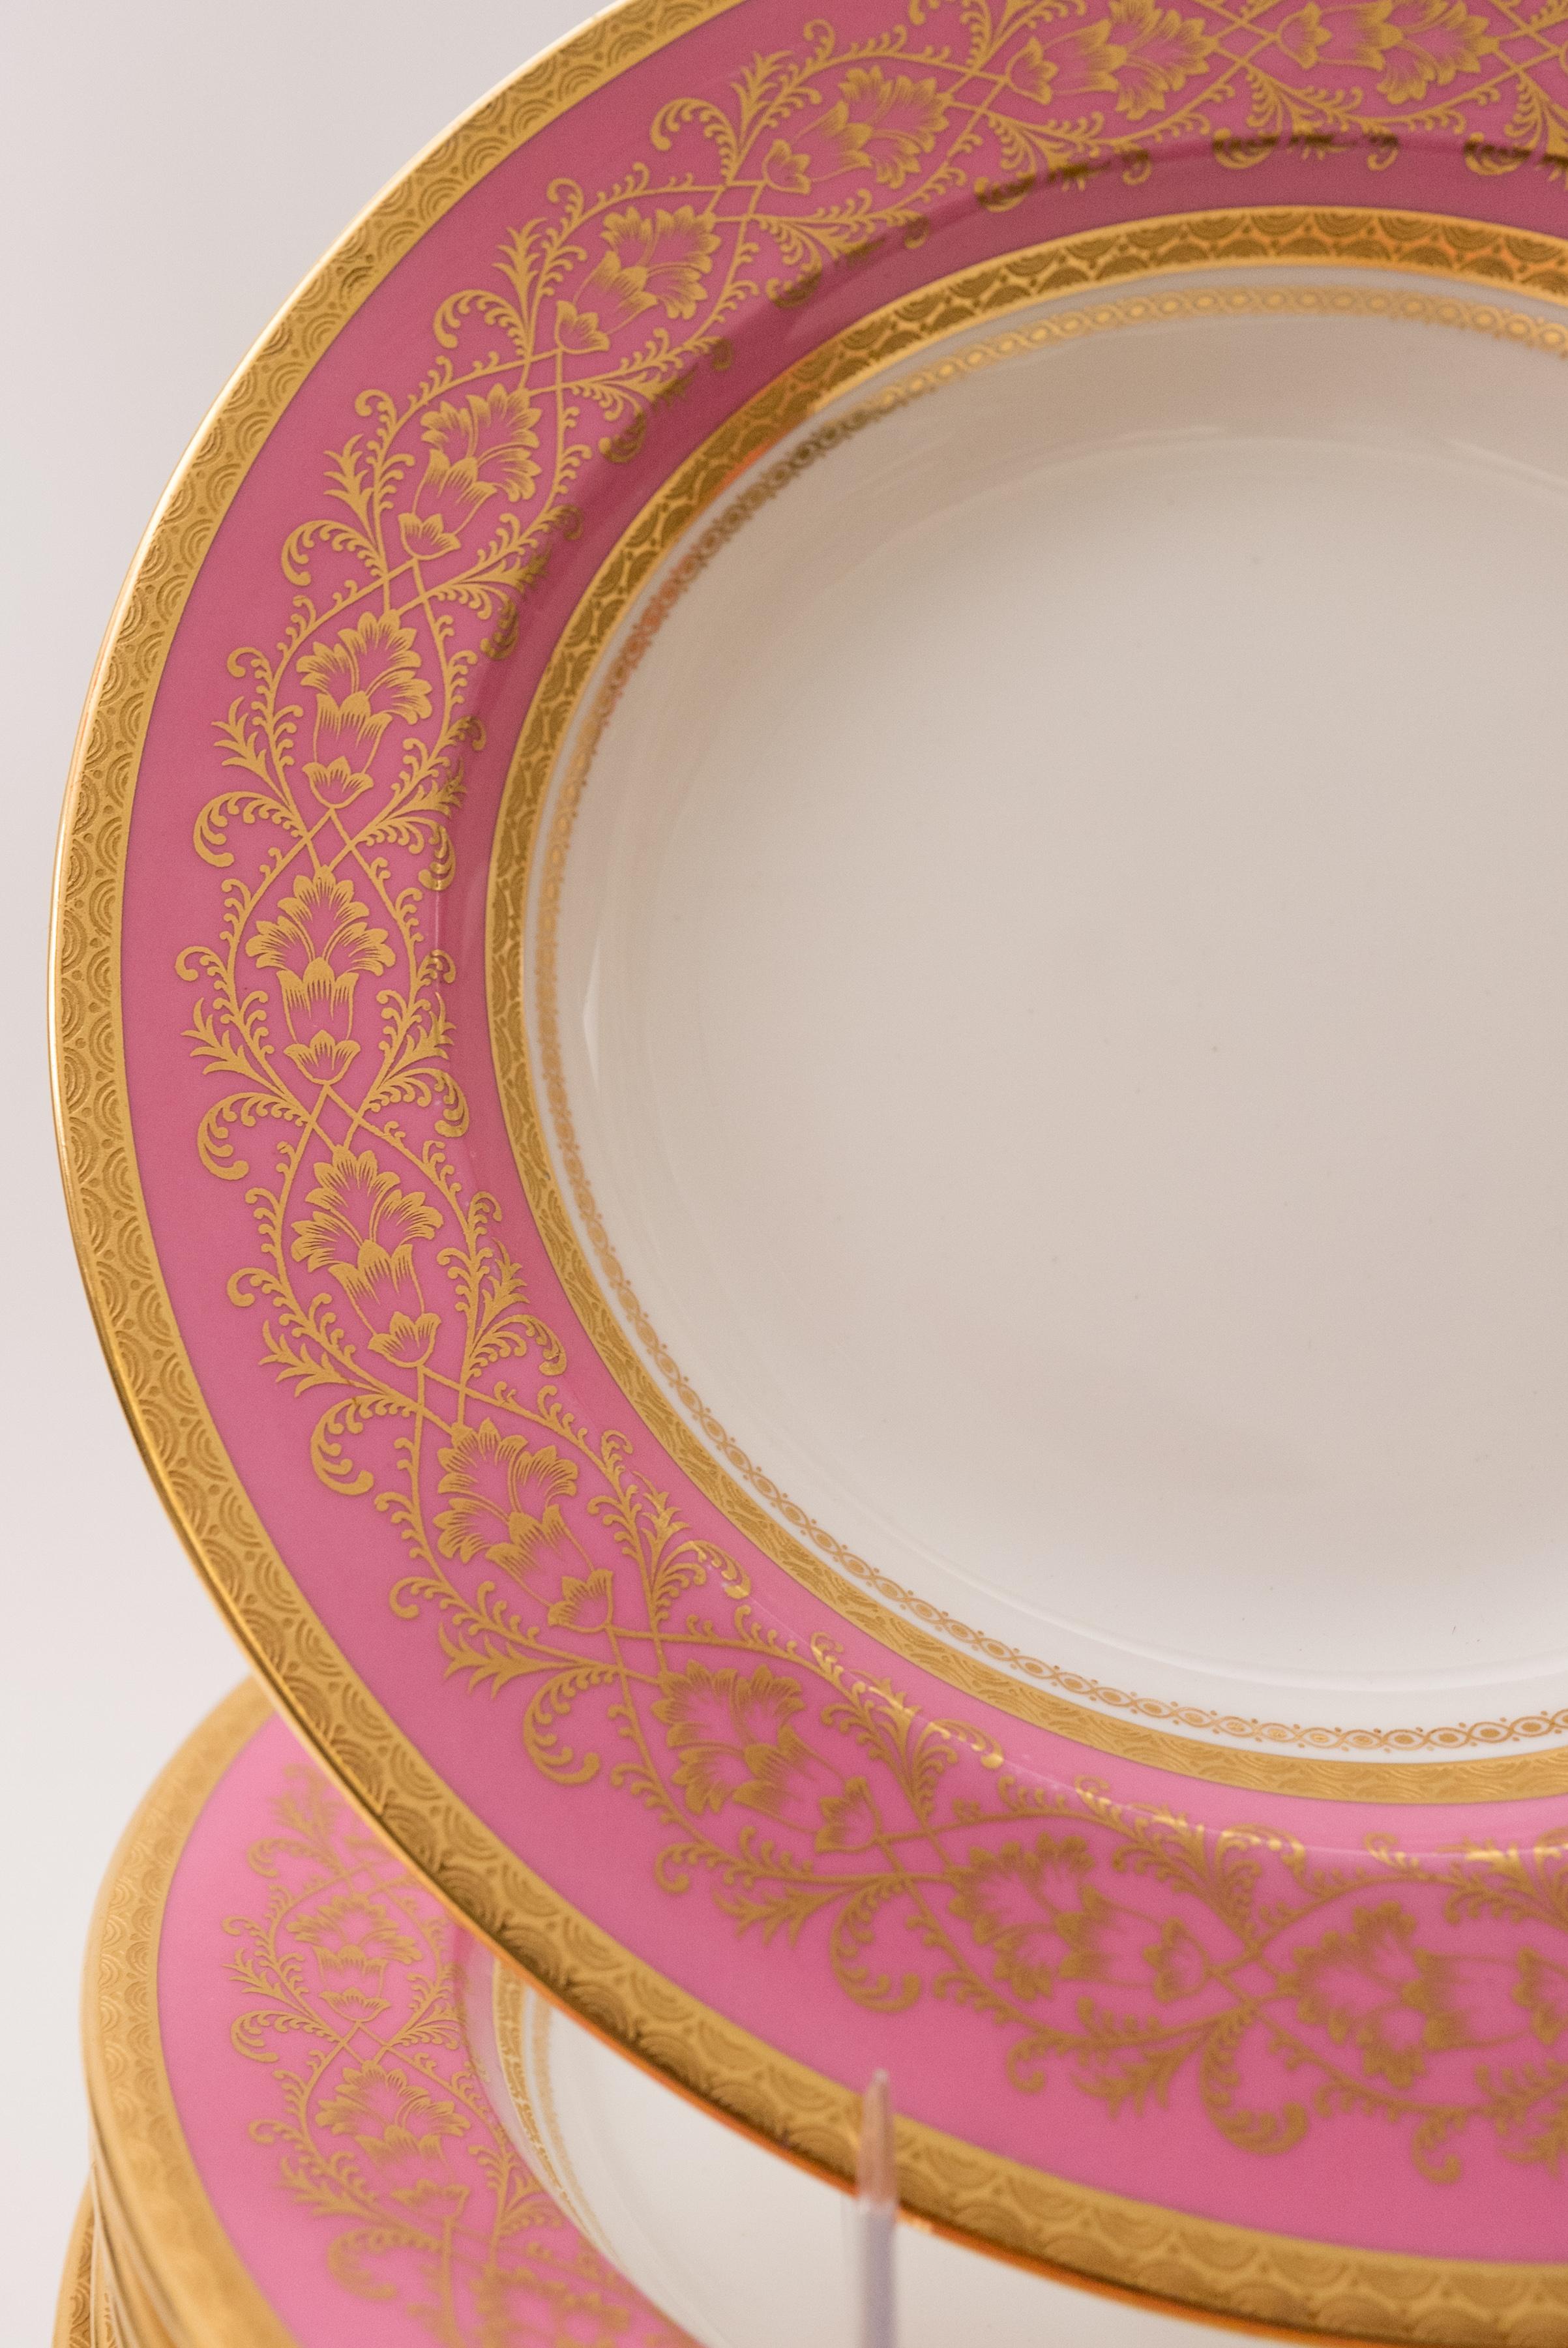 Hand-Crafted Set of 13 Pink & Gilt Rim Soup Bowls, Custom Ordered Antique English, Circa 1900